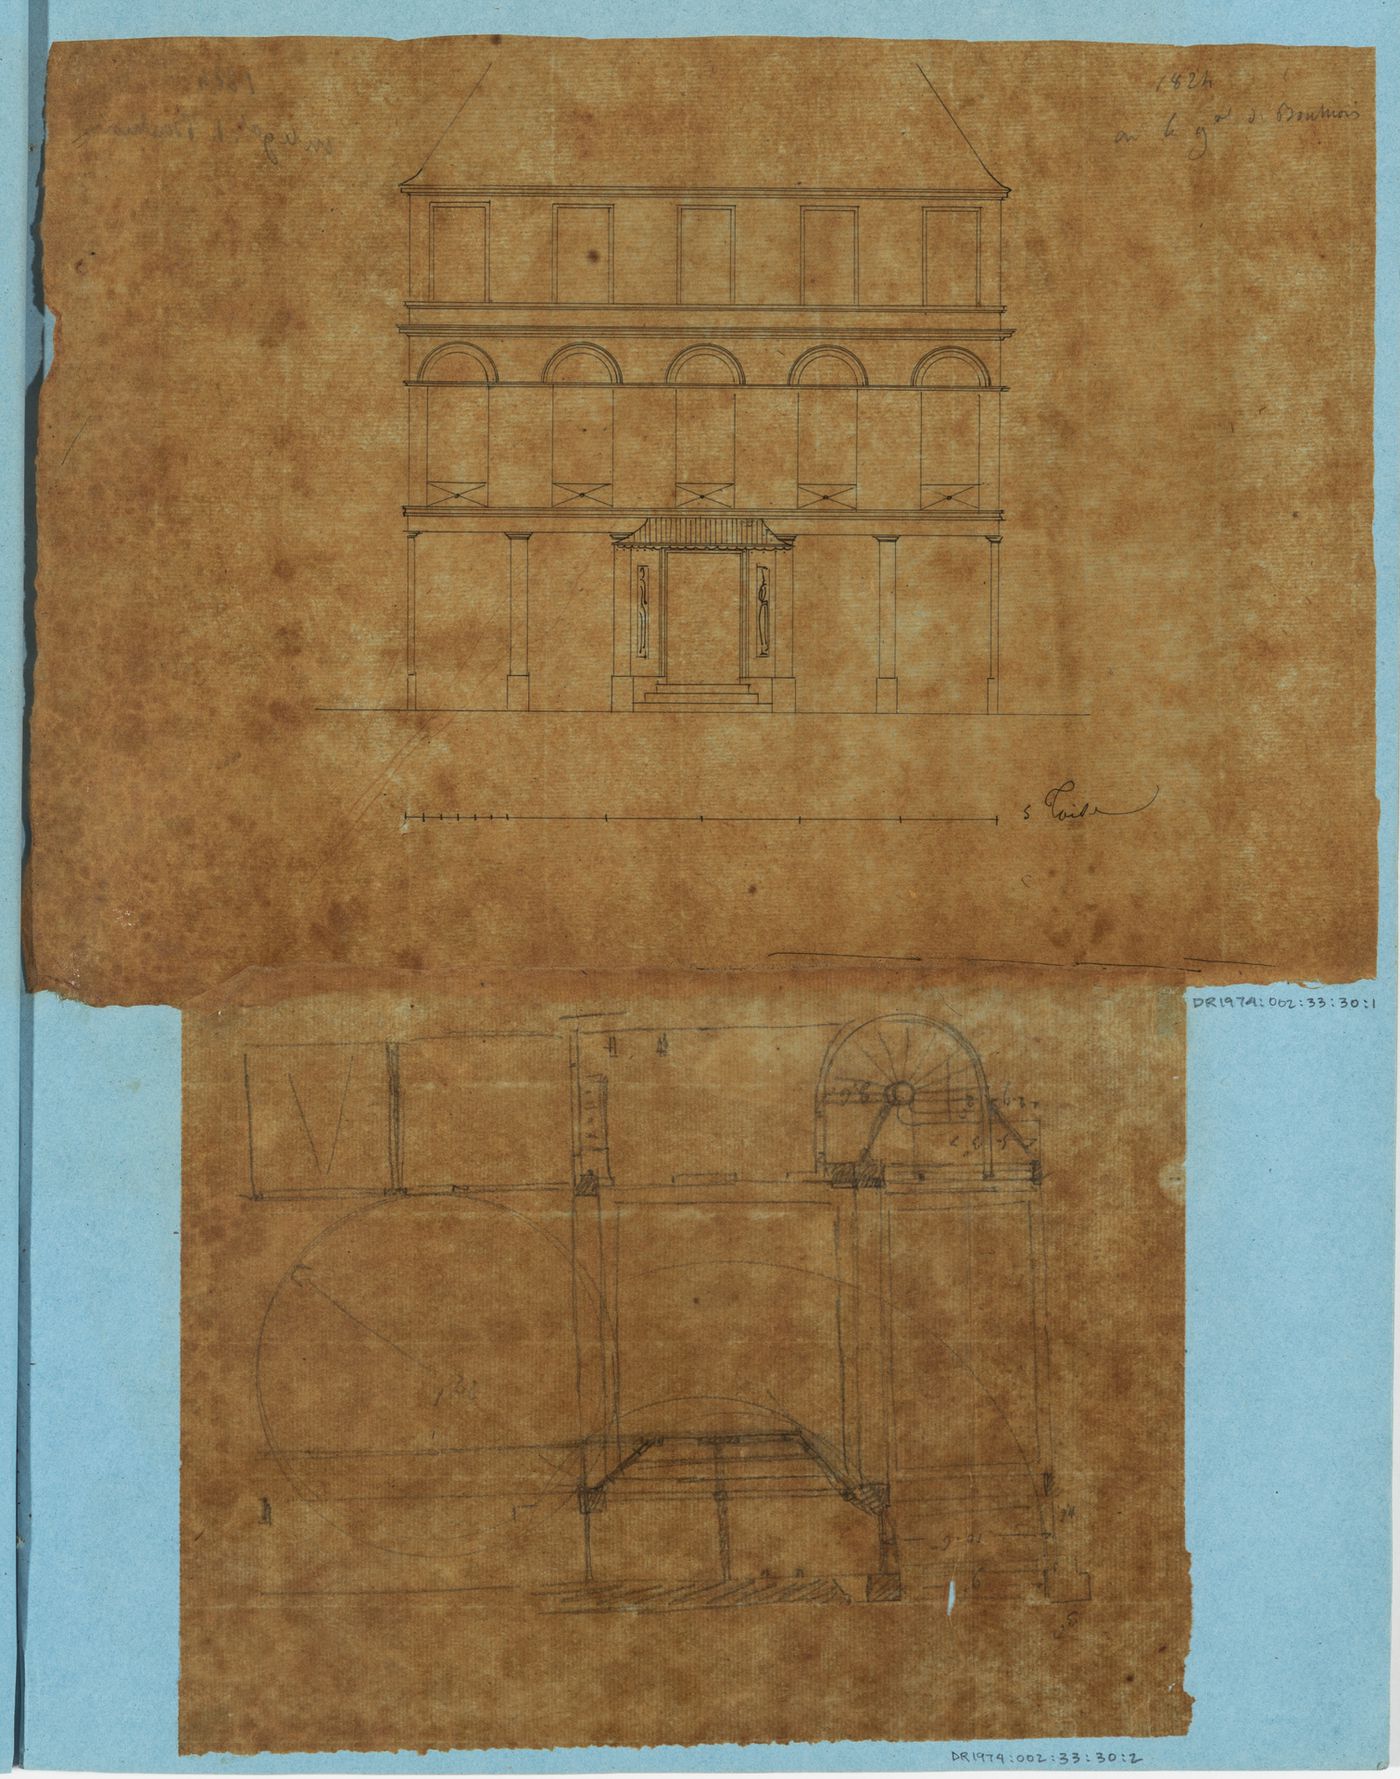 Project for an apartment house for M. Boulnois: Elevation for a three-storey apartment house and an unidentified partial sketch plan